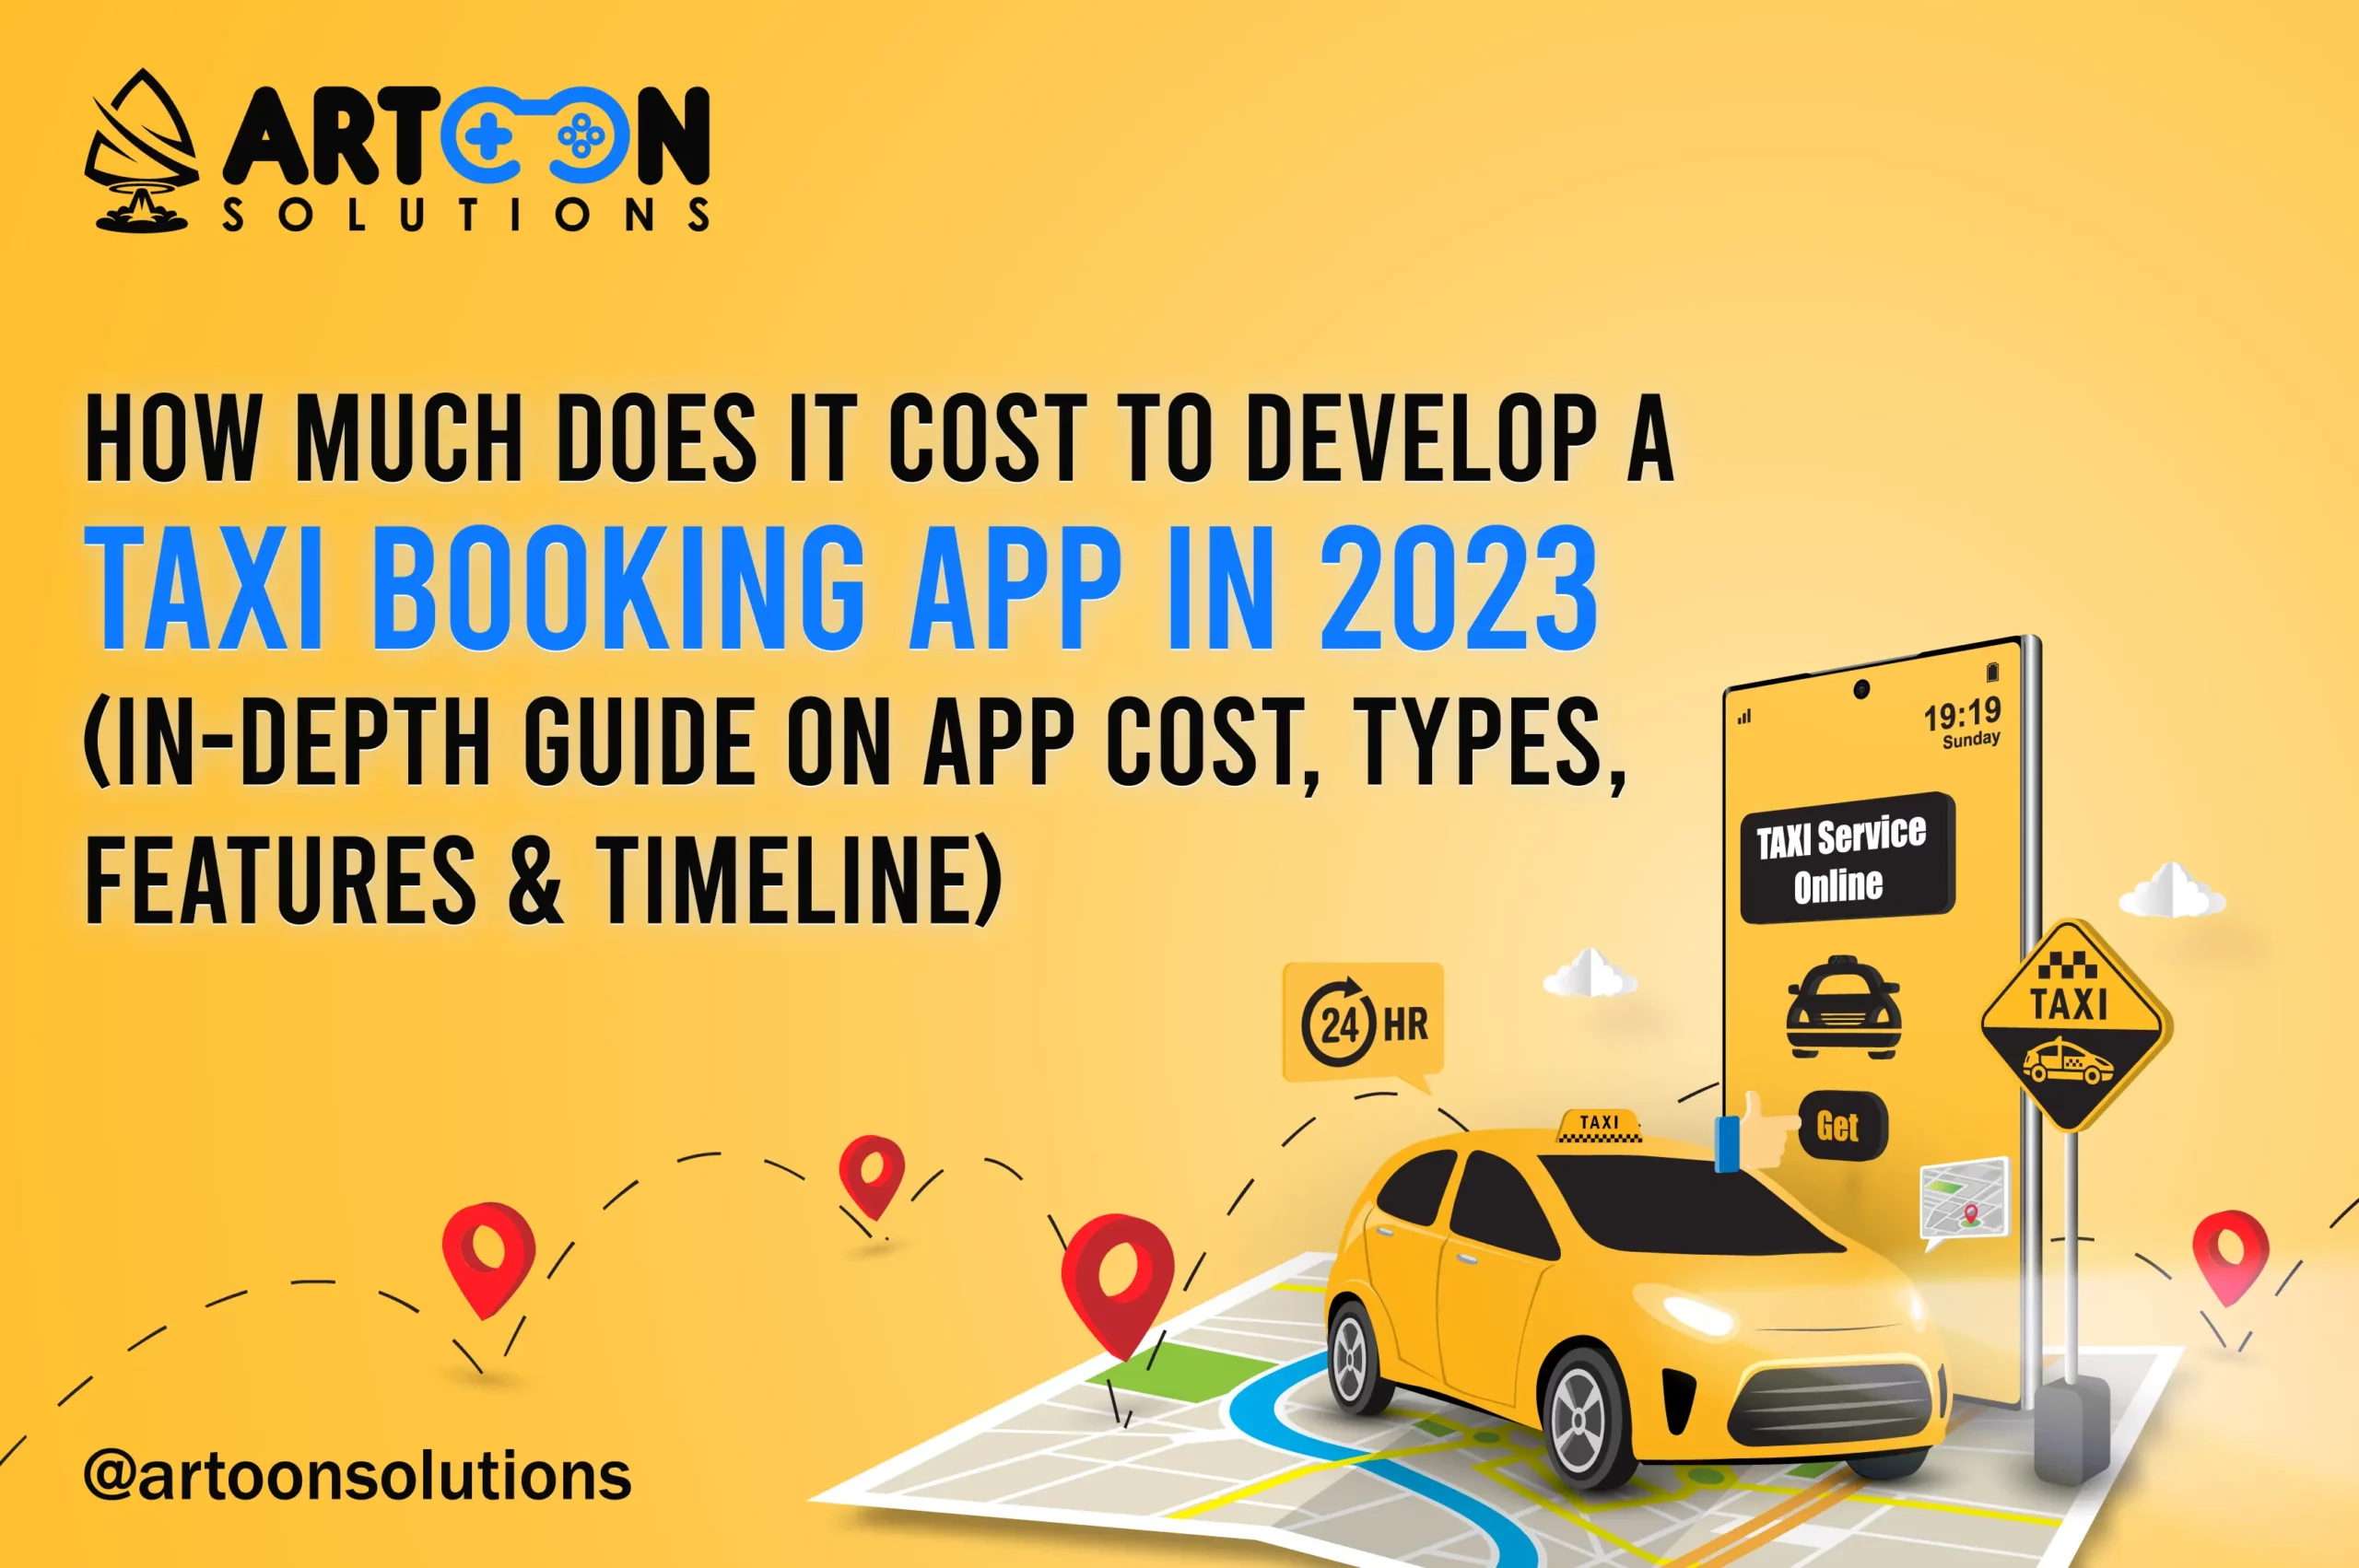 How Much Does it Cost to Develop a Taxi Booking App in 2023?